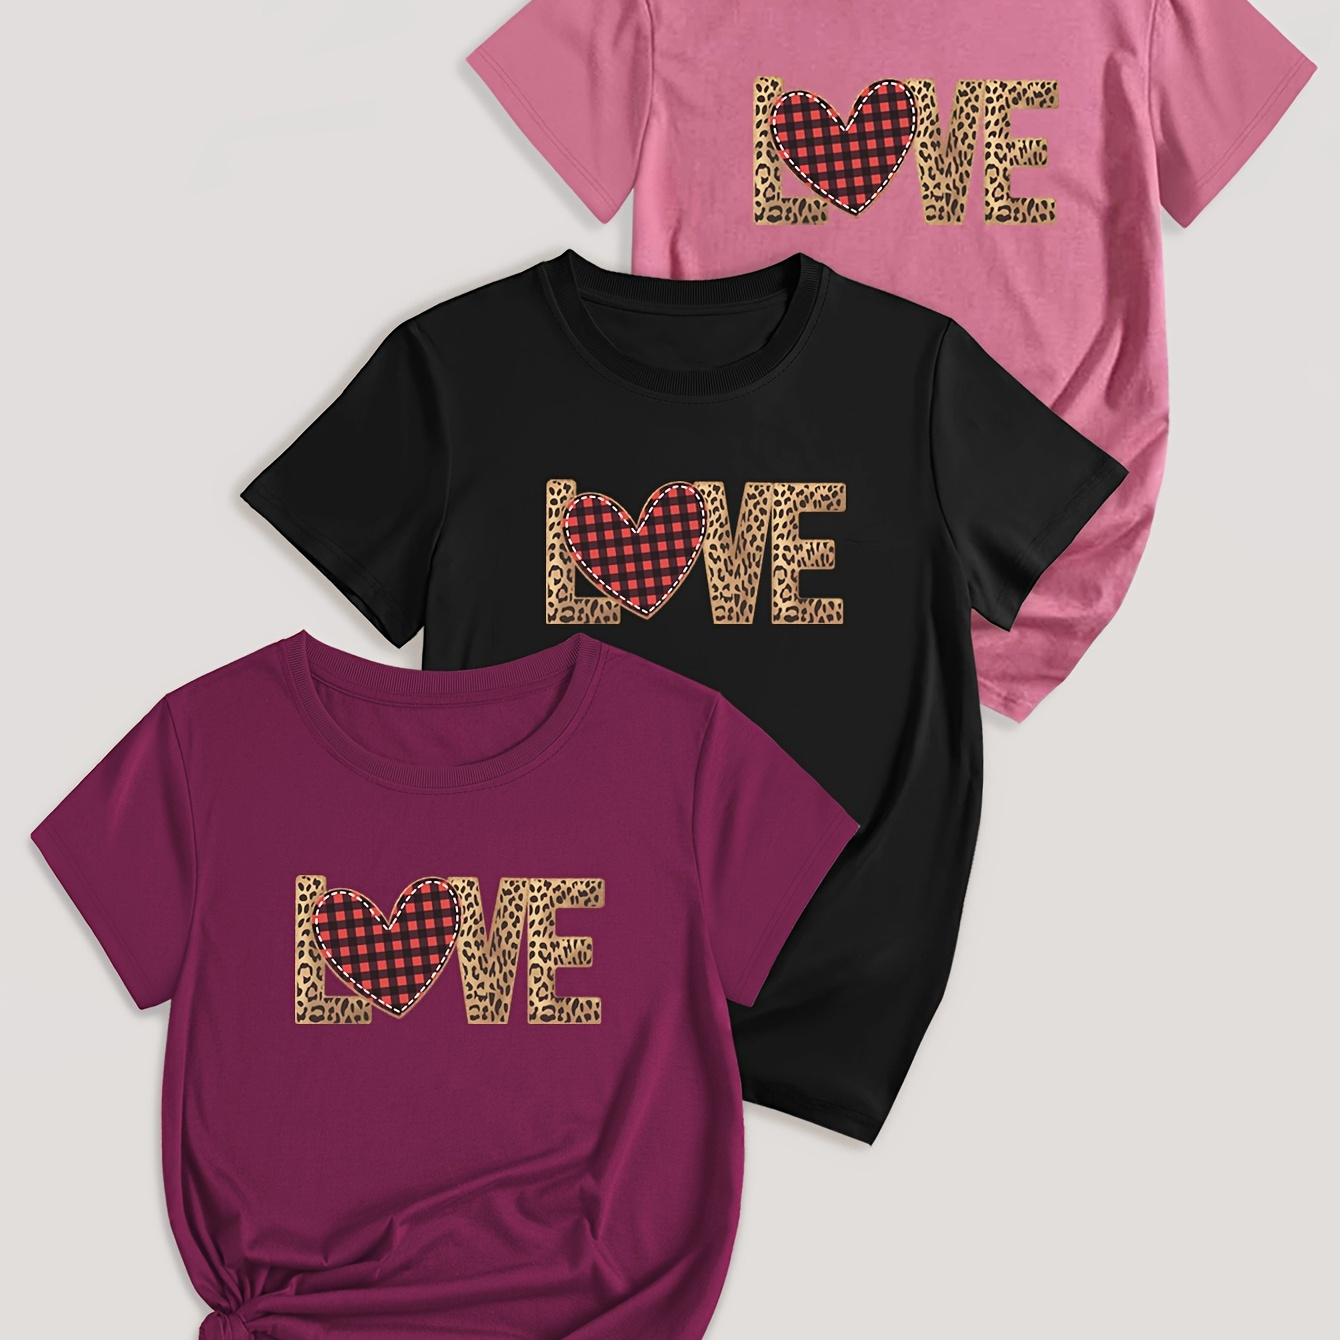 

Love Print T-shirt 3 Pack, Casual Crew Neck Short Sleeve Top For Spring & Summer, Women's Clothing